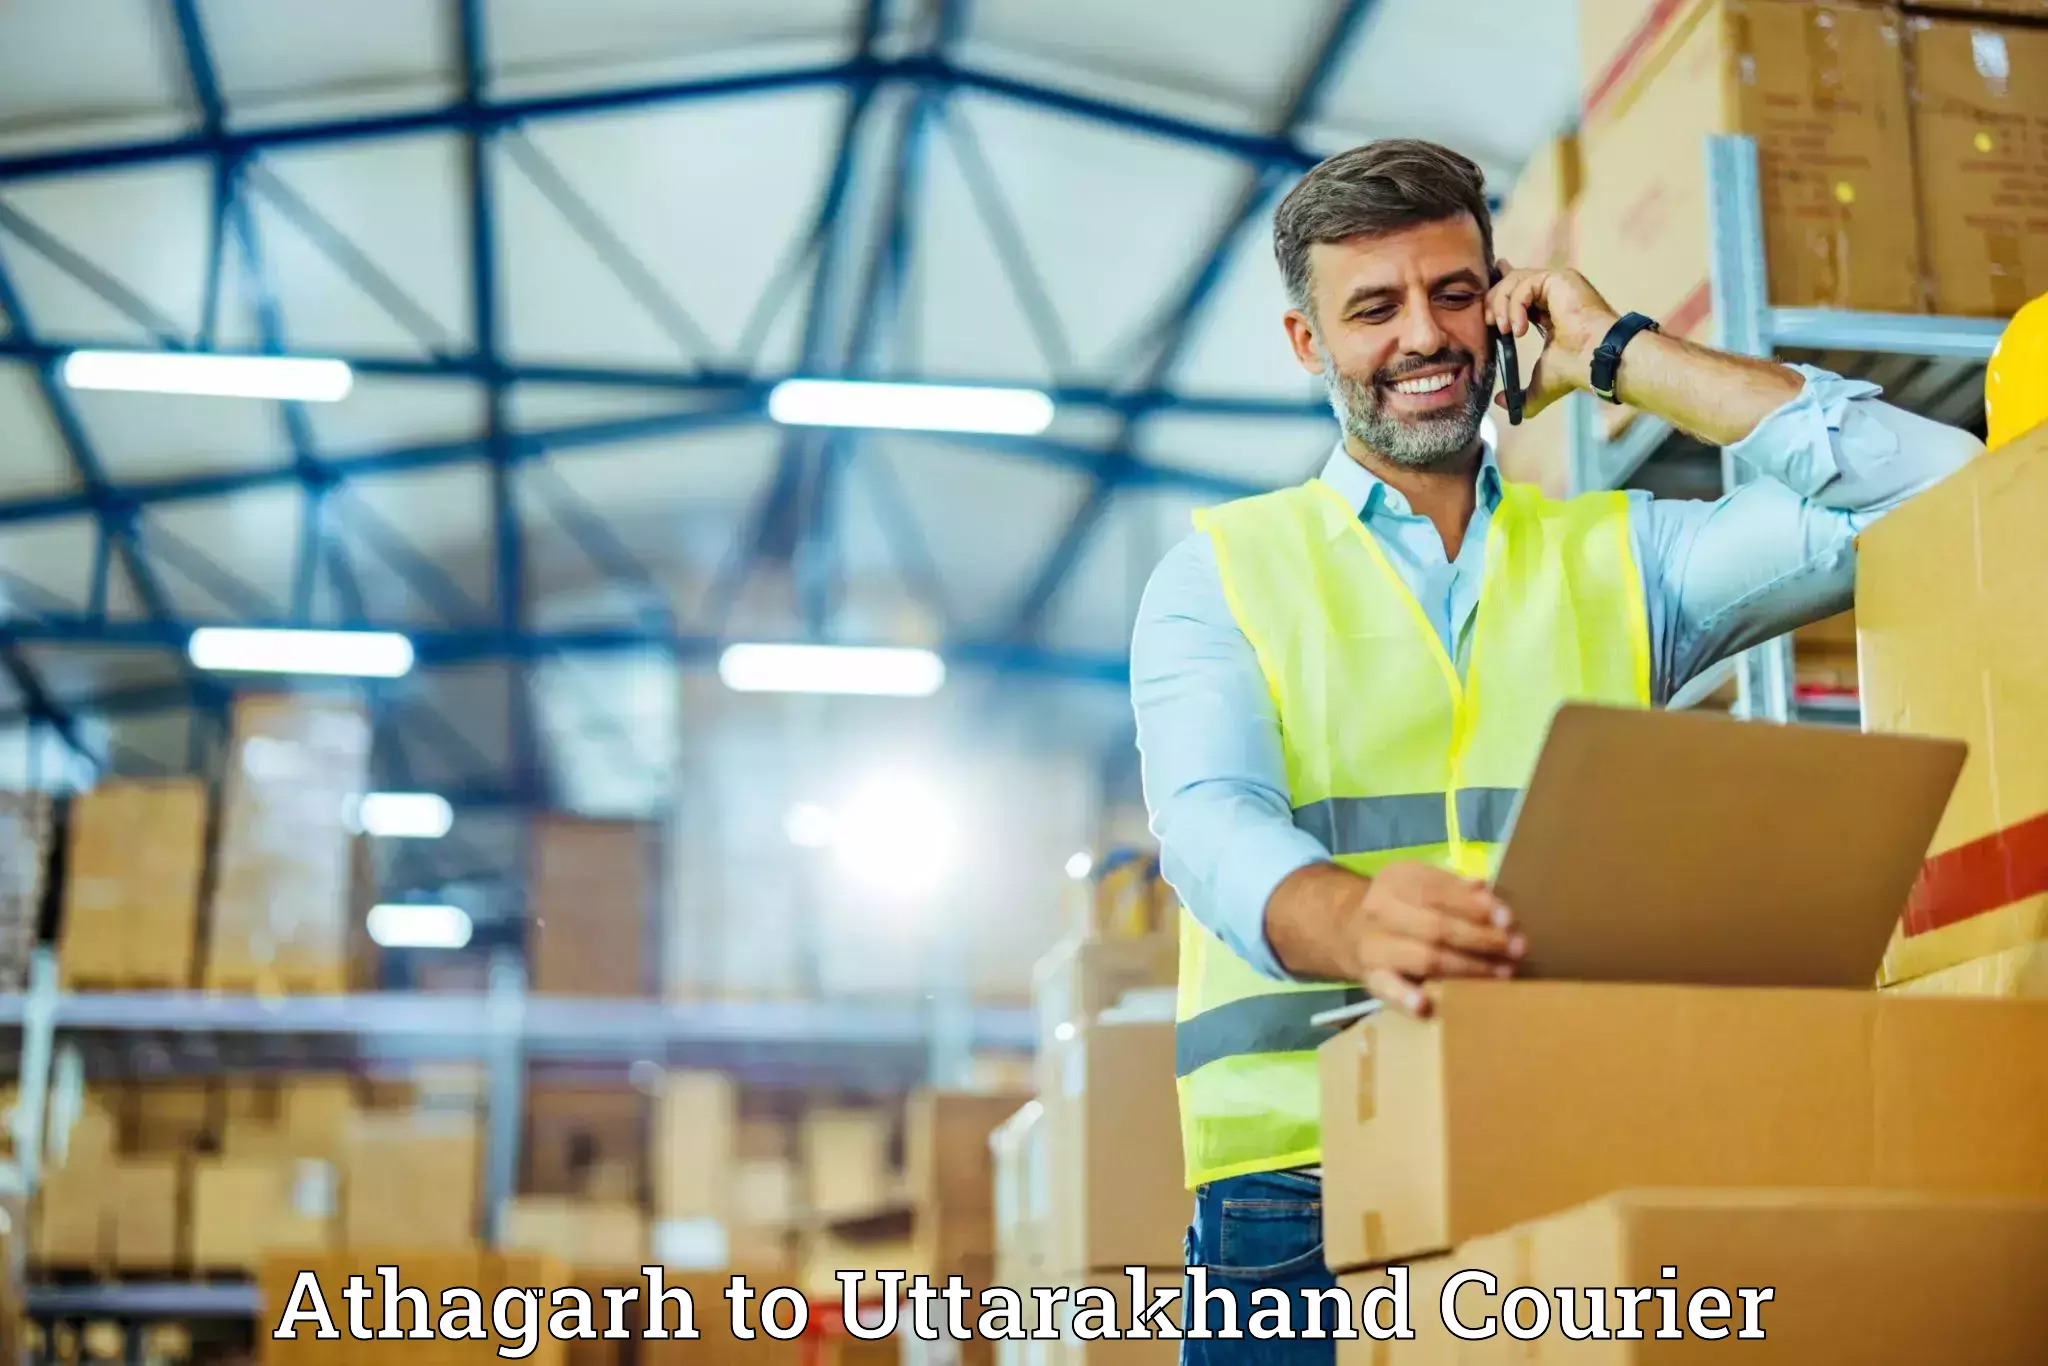 Professional moving assistance Athagarh to Rishikesh